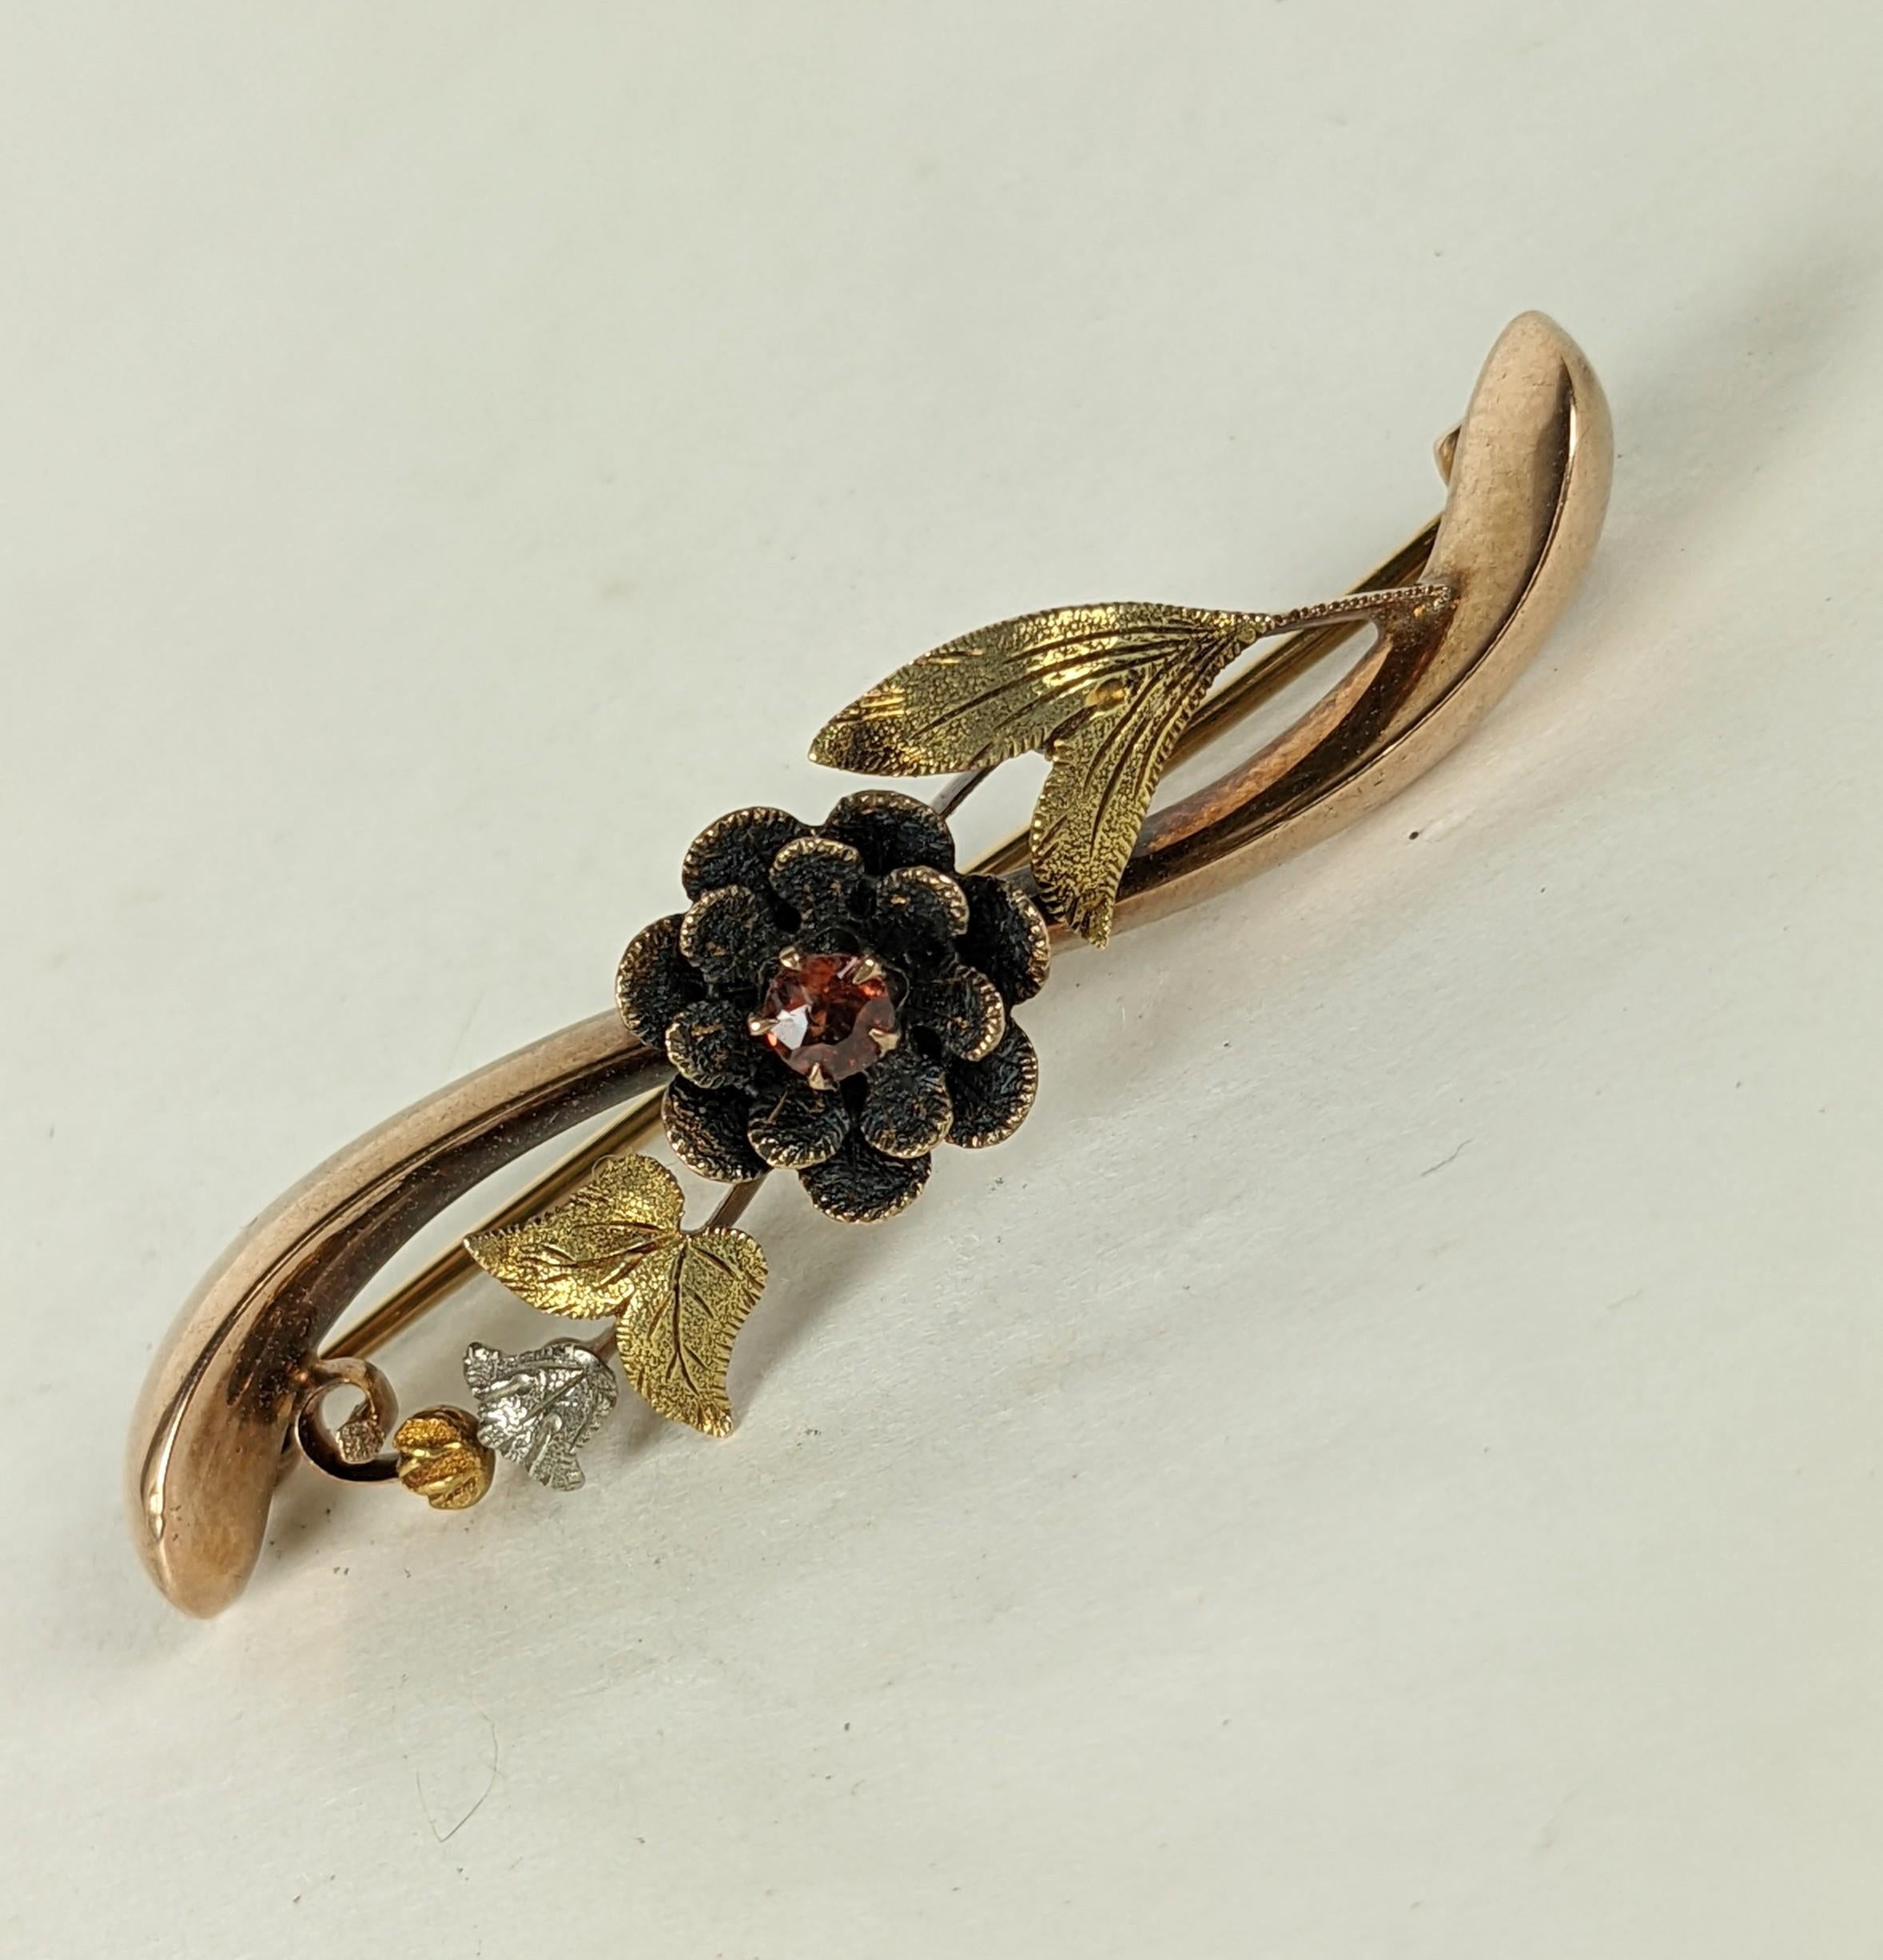 Victorian Tri Color Gold Floral Bar Pin from the 19th Century. Lovely 14k gold brooch with etched flower petals and leaves in green, yellow and red gold detailing. Garnet centered flower. 1870's USA.  1.75